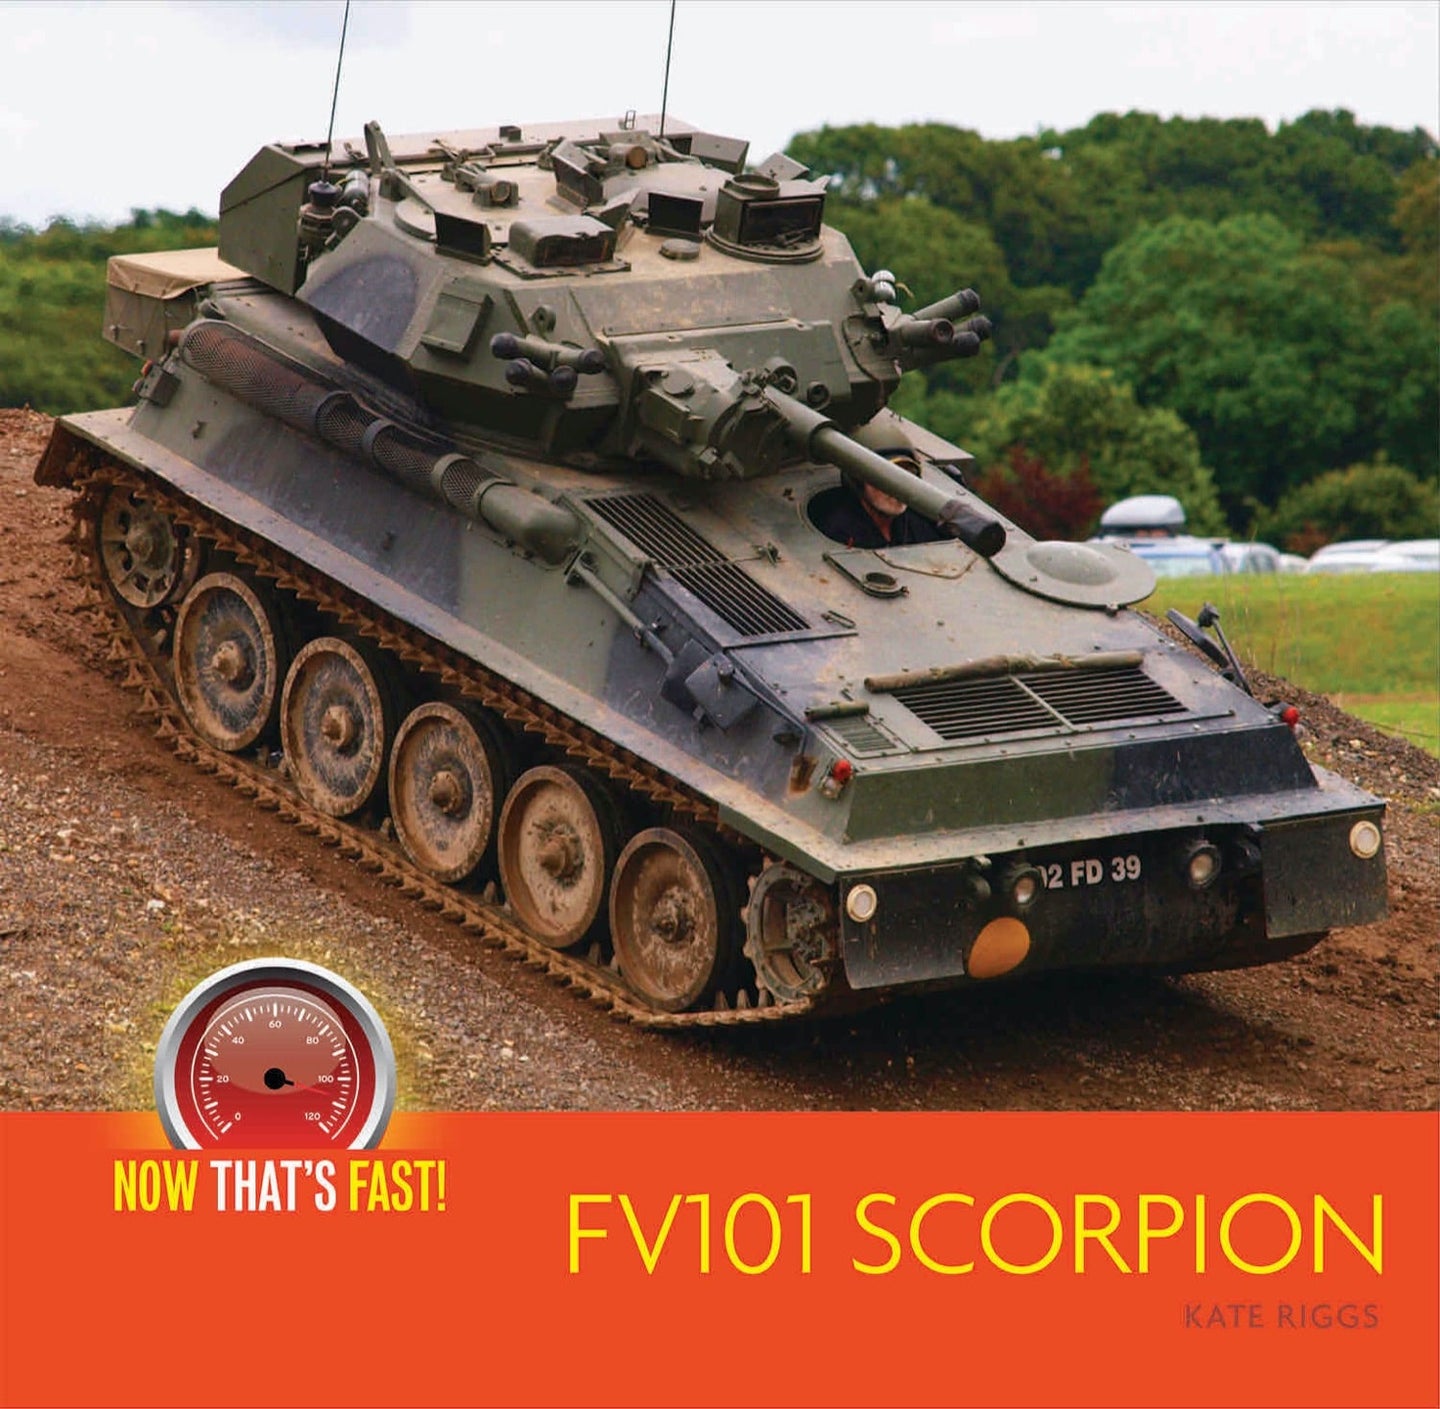 Now That's Fast!: FV101 Scorpion